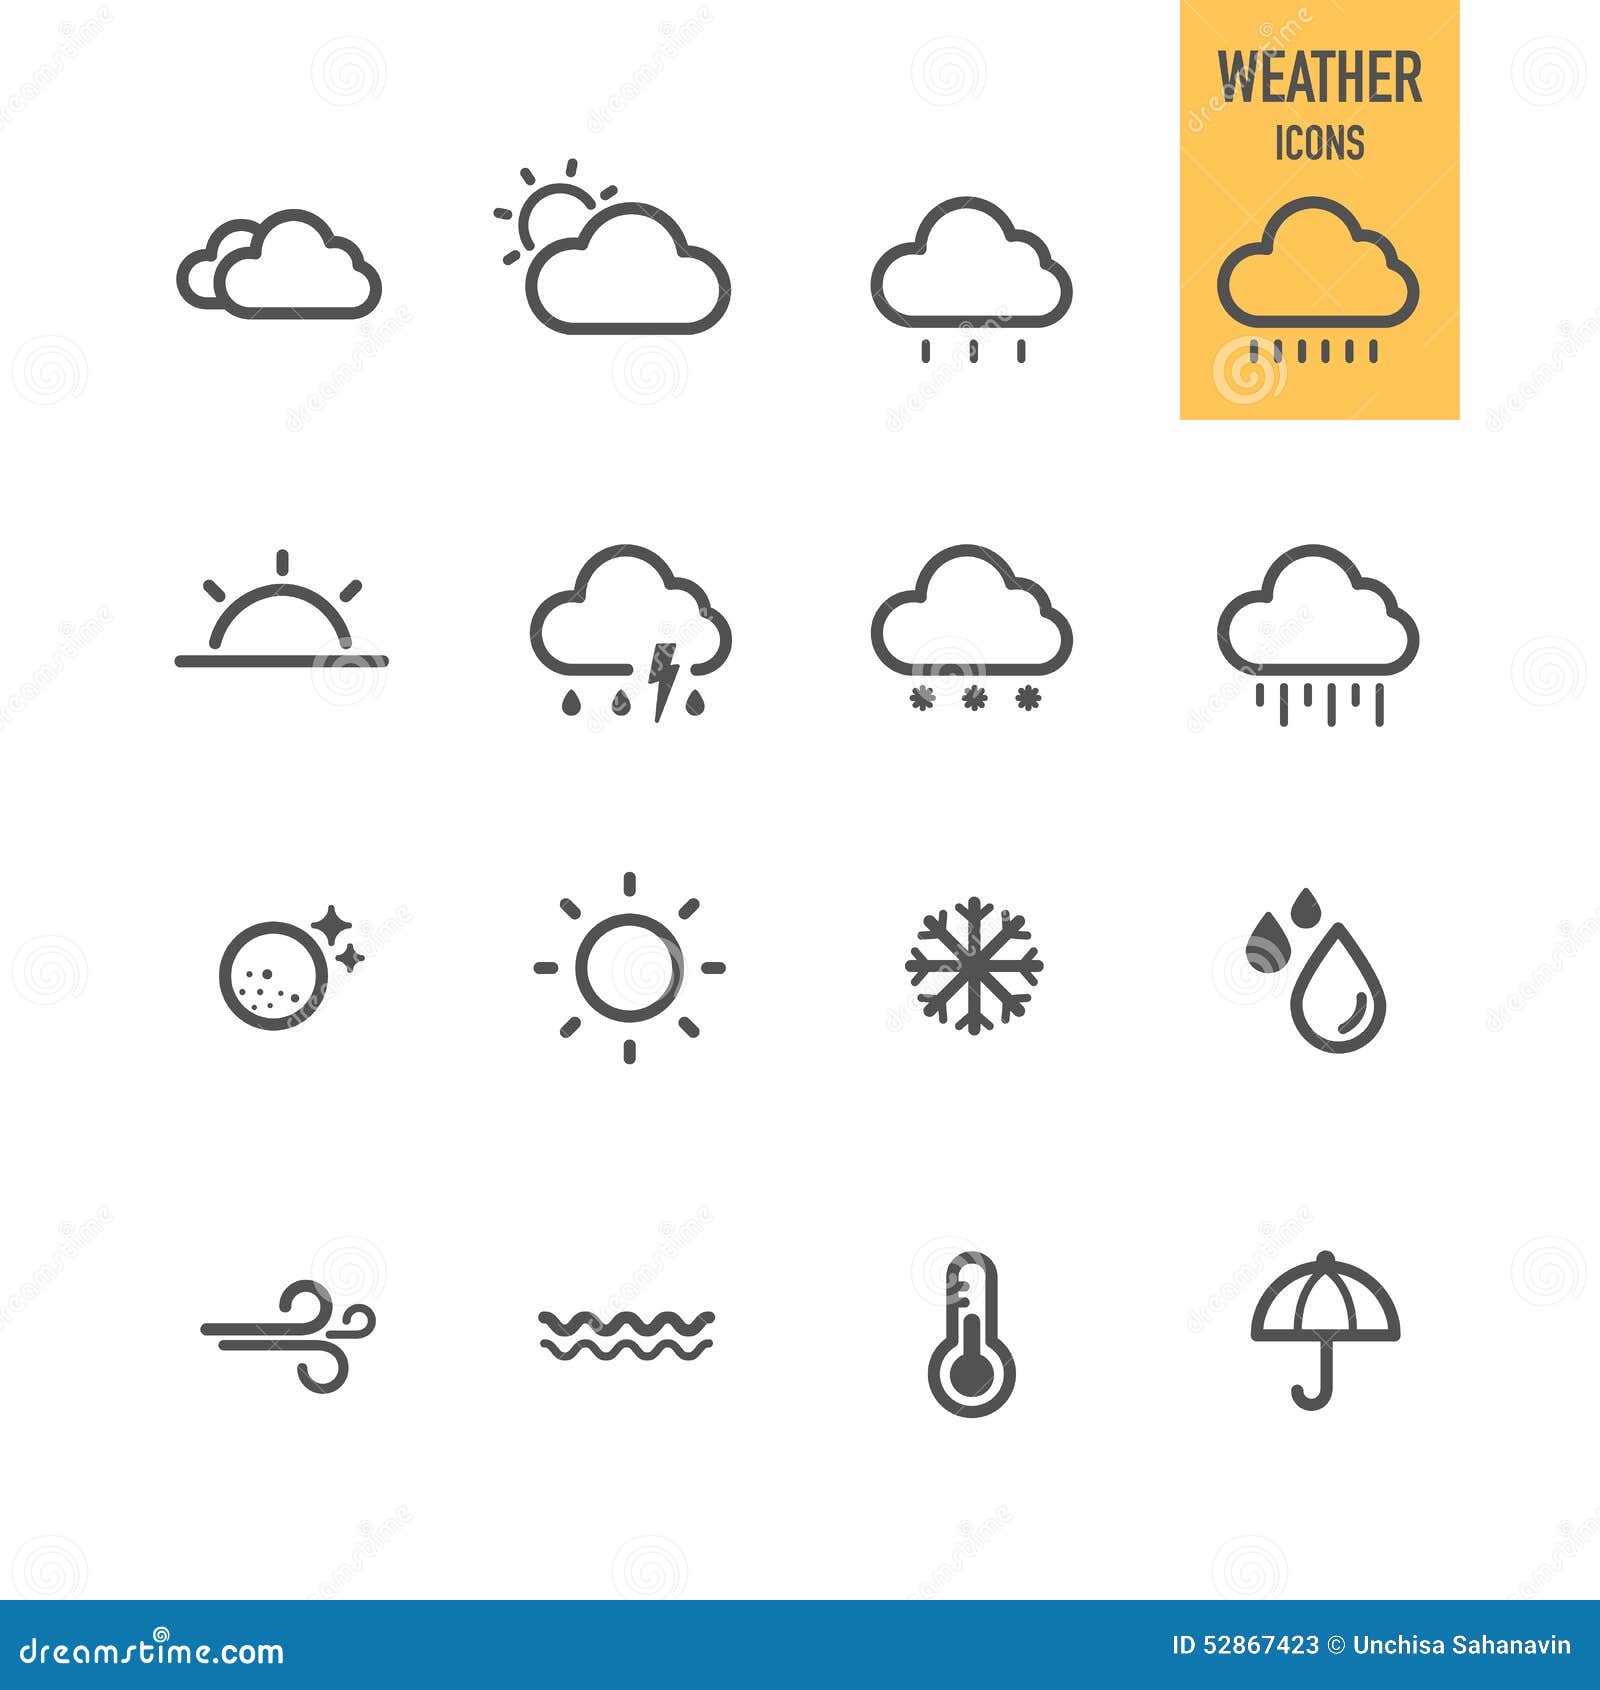 weather icons sets.